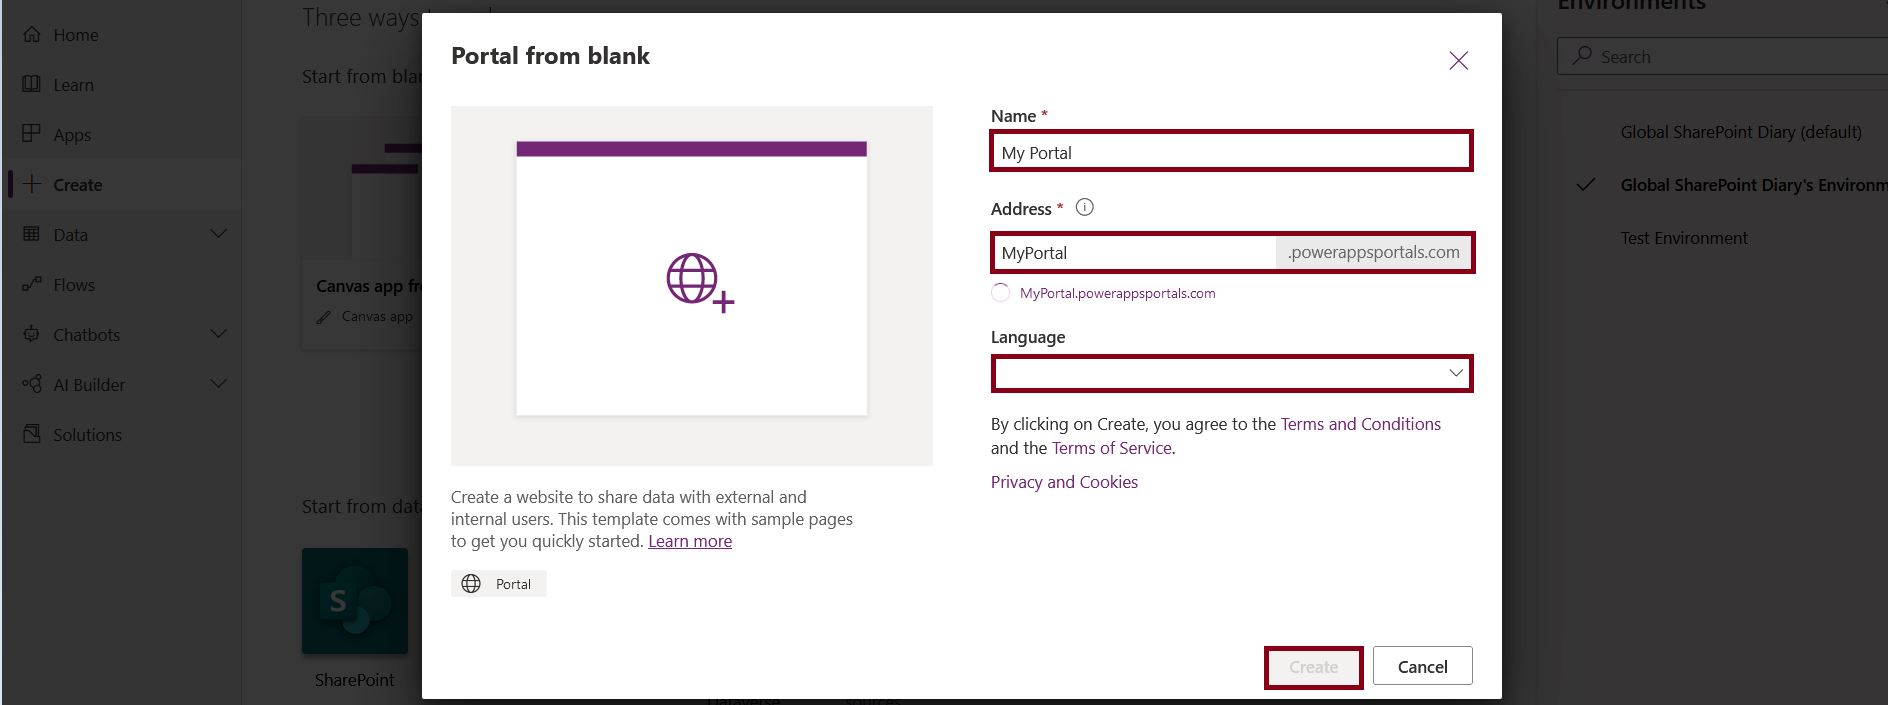 Different Types of PowerApps - Create Power App portal from blank